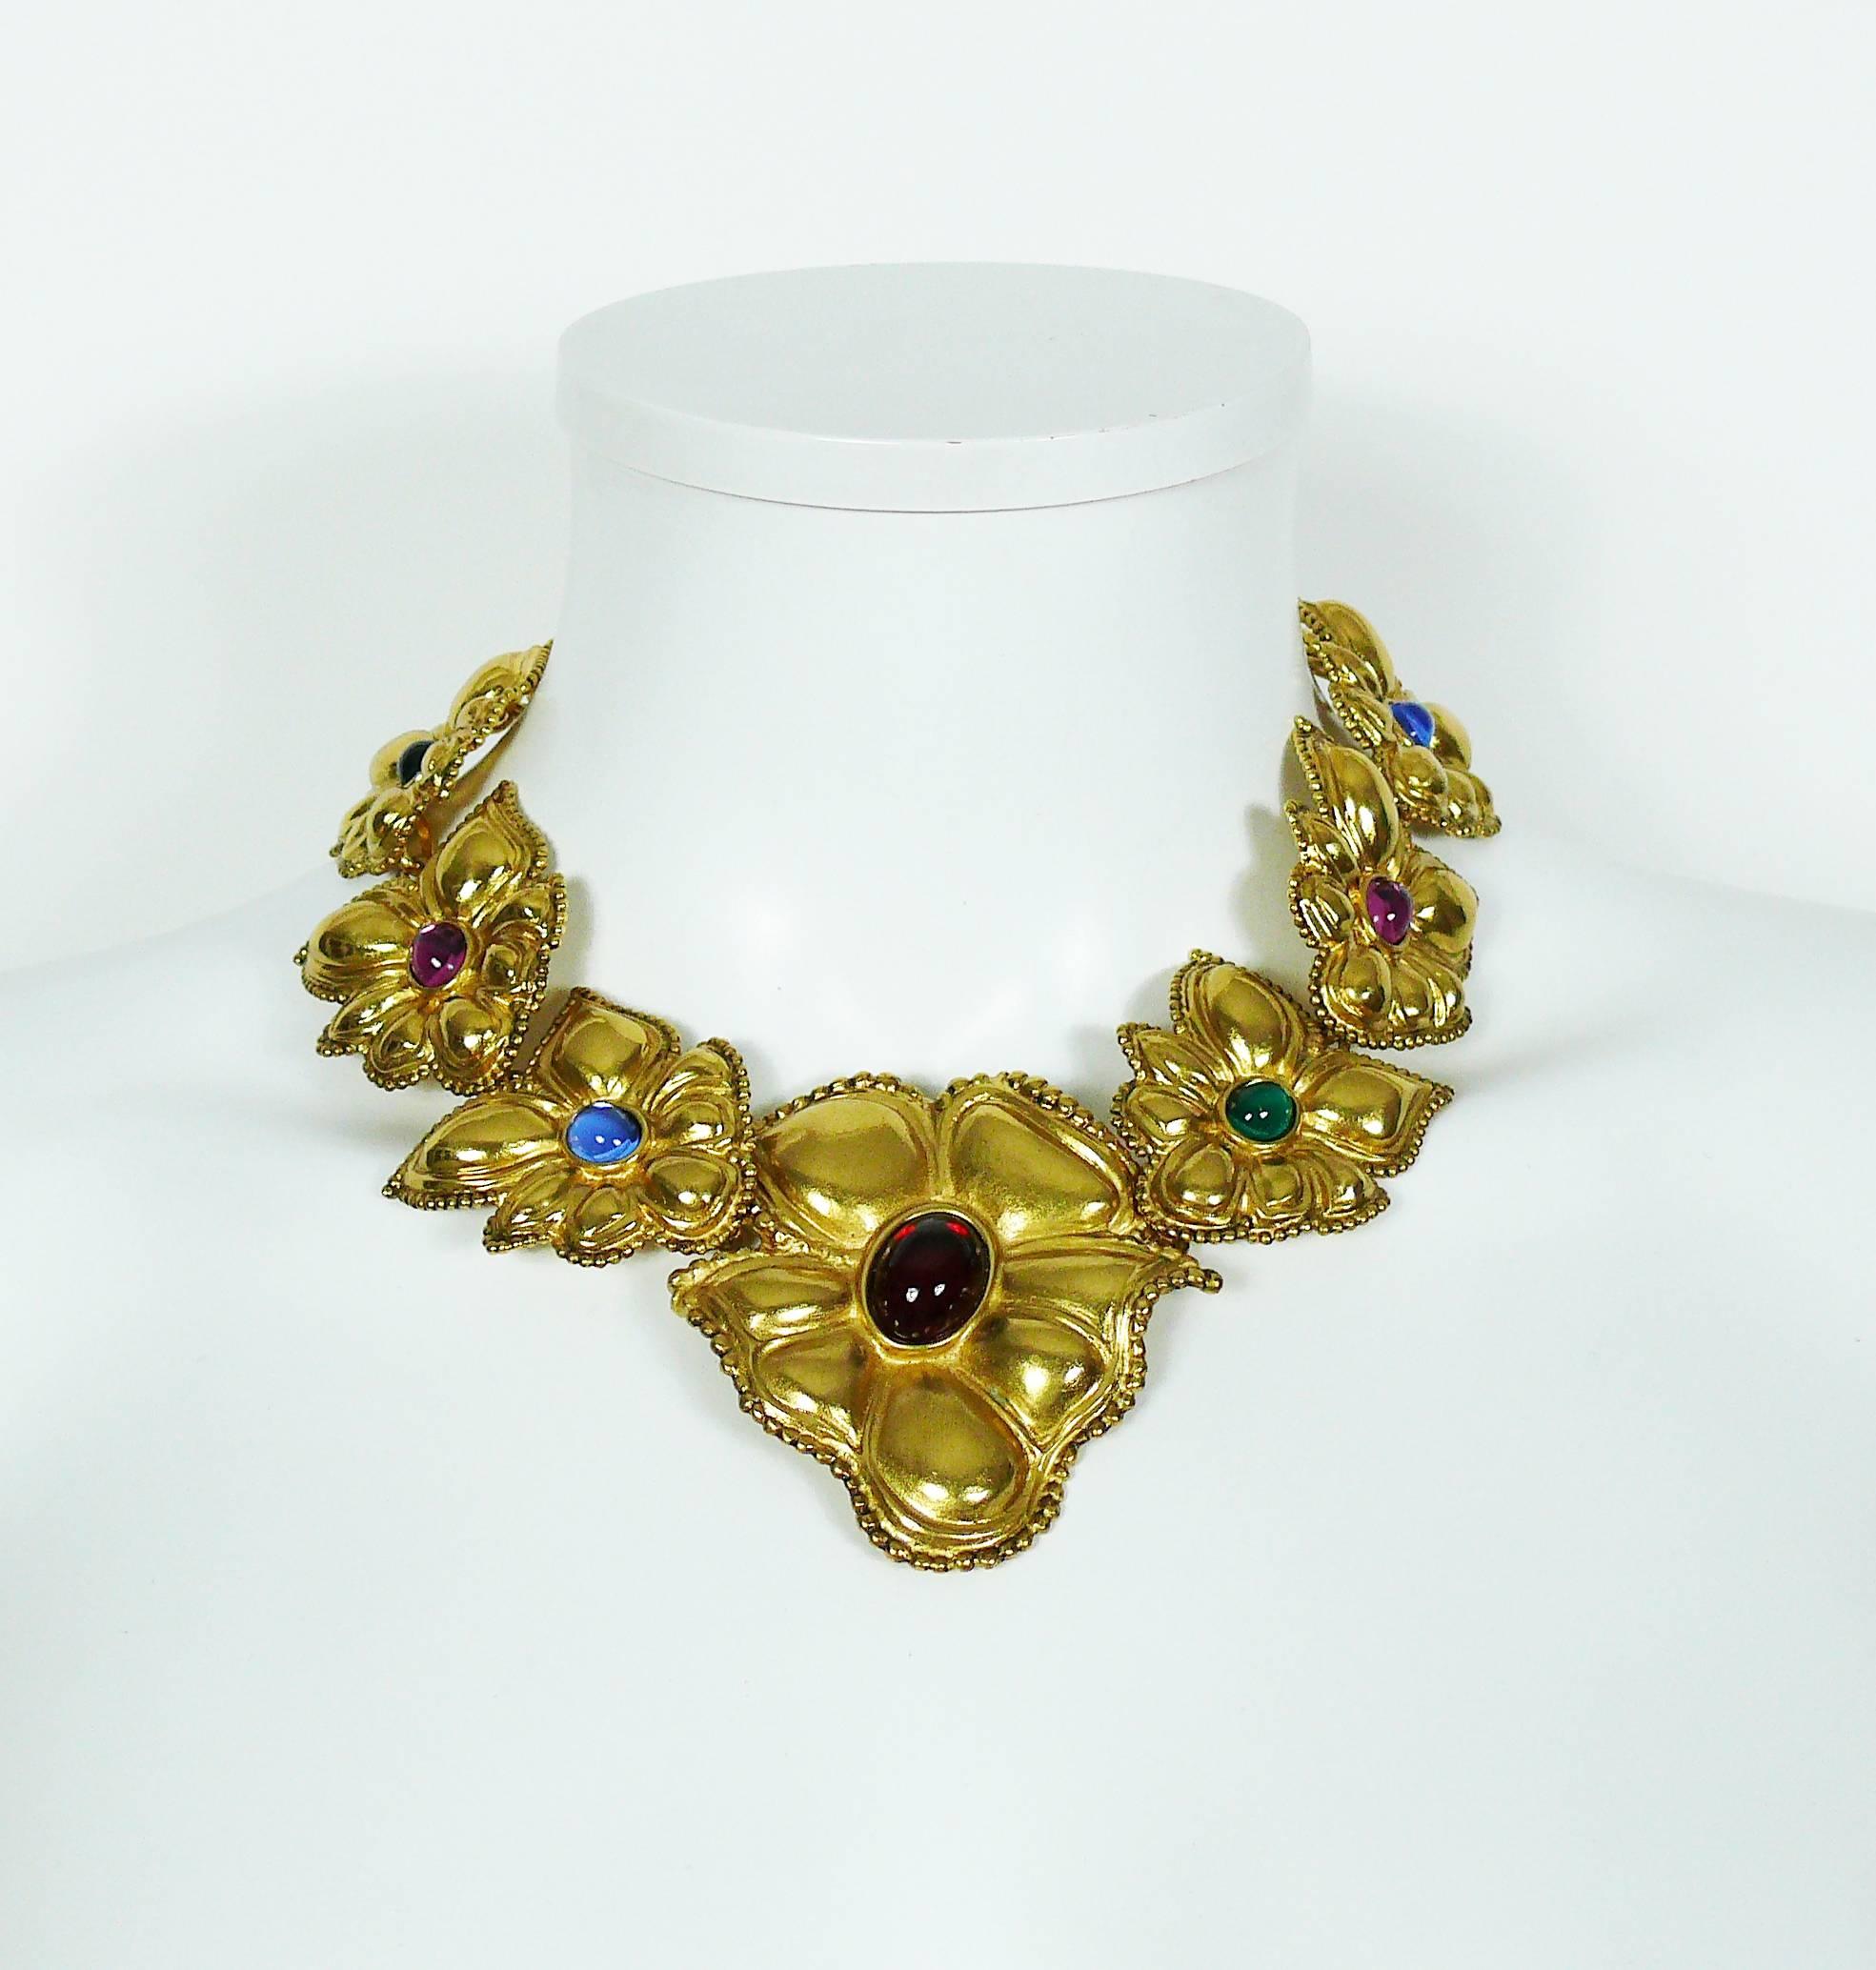 JEAN LOUIS SCHERRER gorgeous vintage 1980s statement gold toned floral necklace embellished with multicolored glass cabochons.

Stunning panther head clasp with ruby crystal eye.
Extension chain.

Marked SCHERRER Paris Made in France.

Indicative